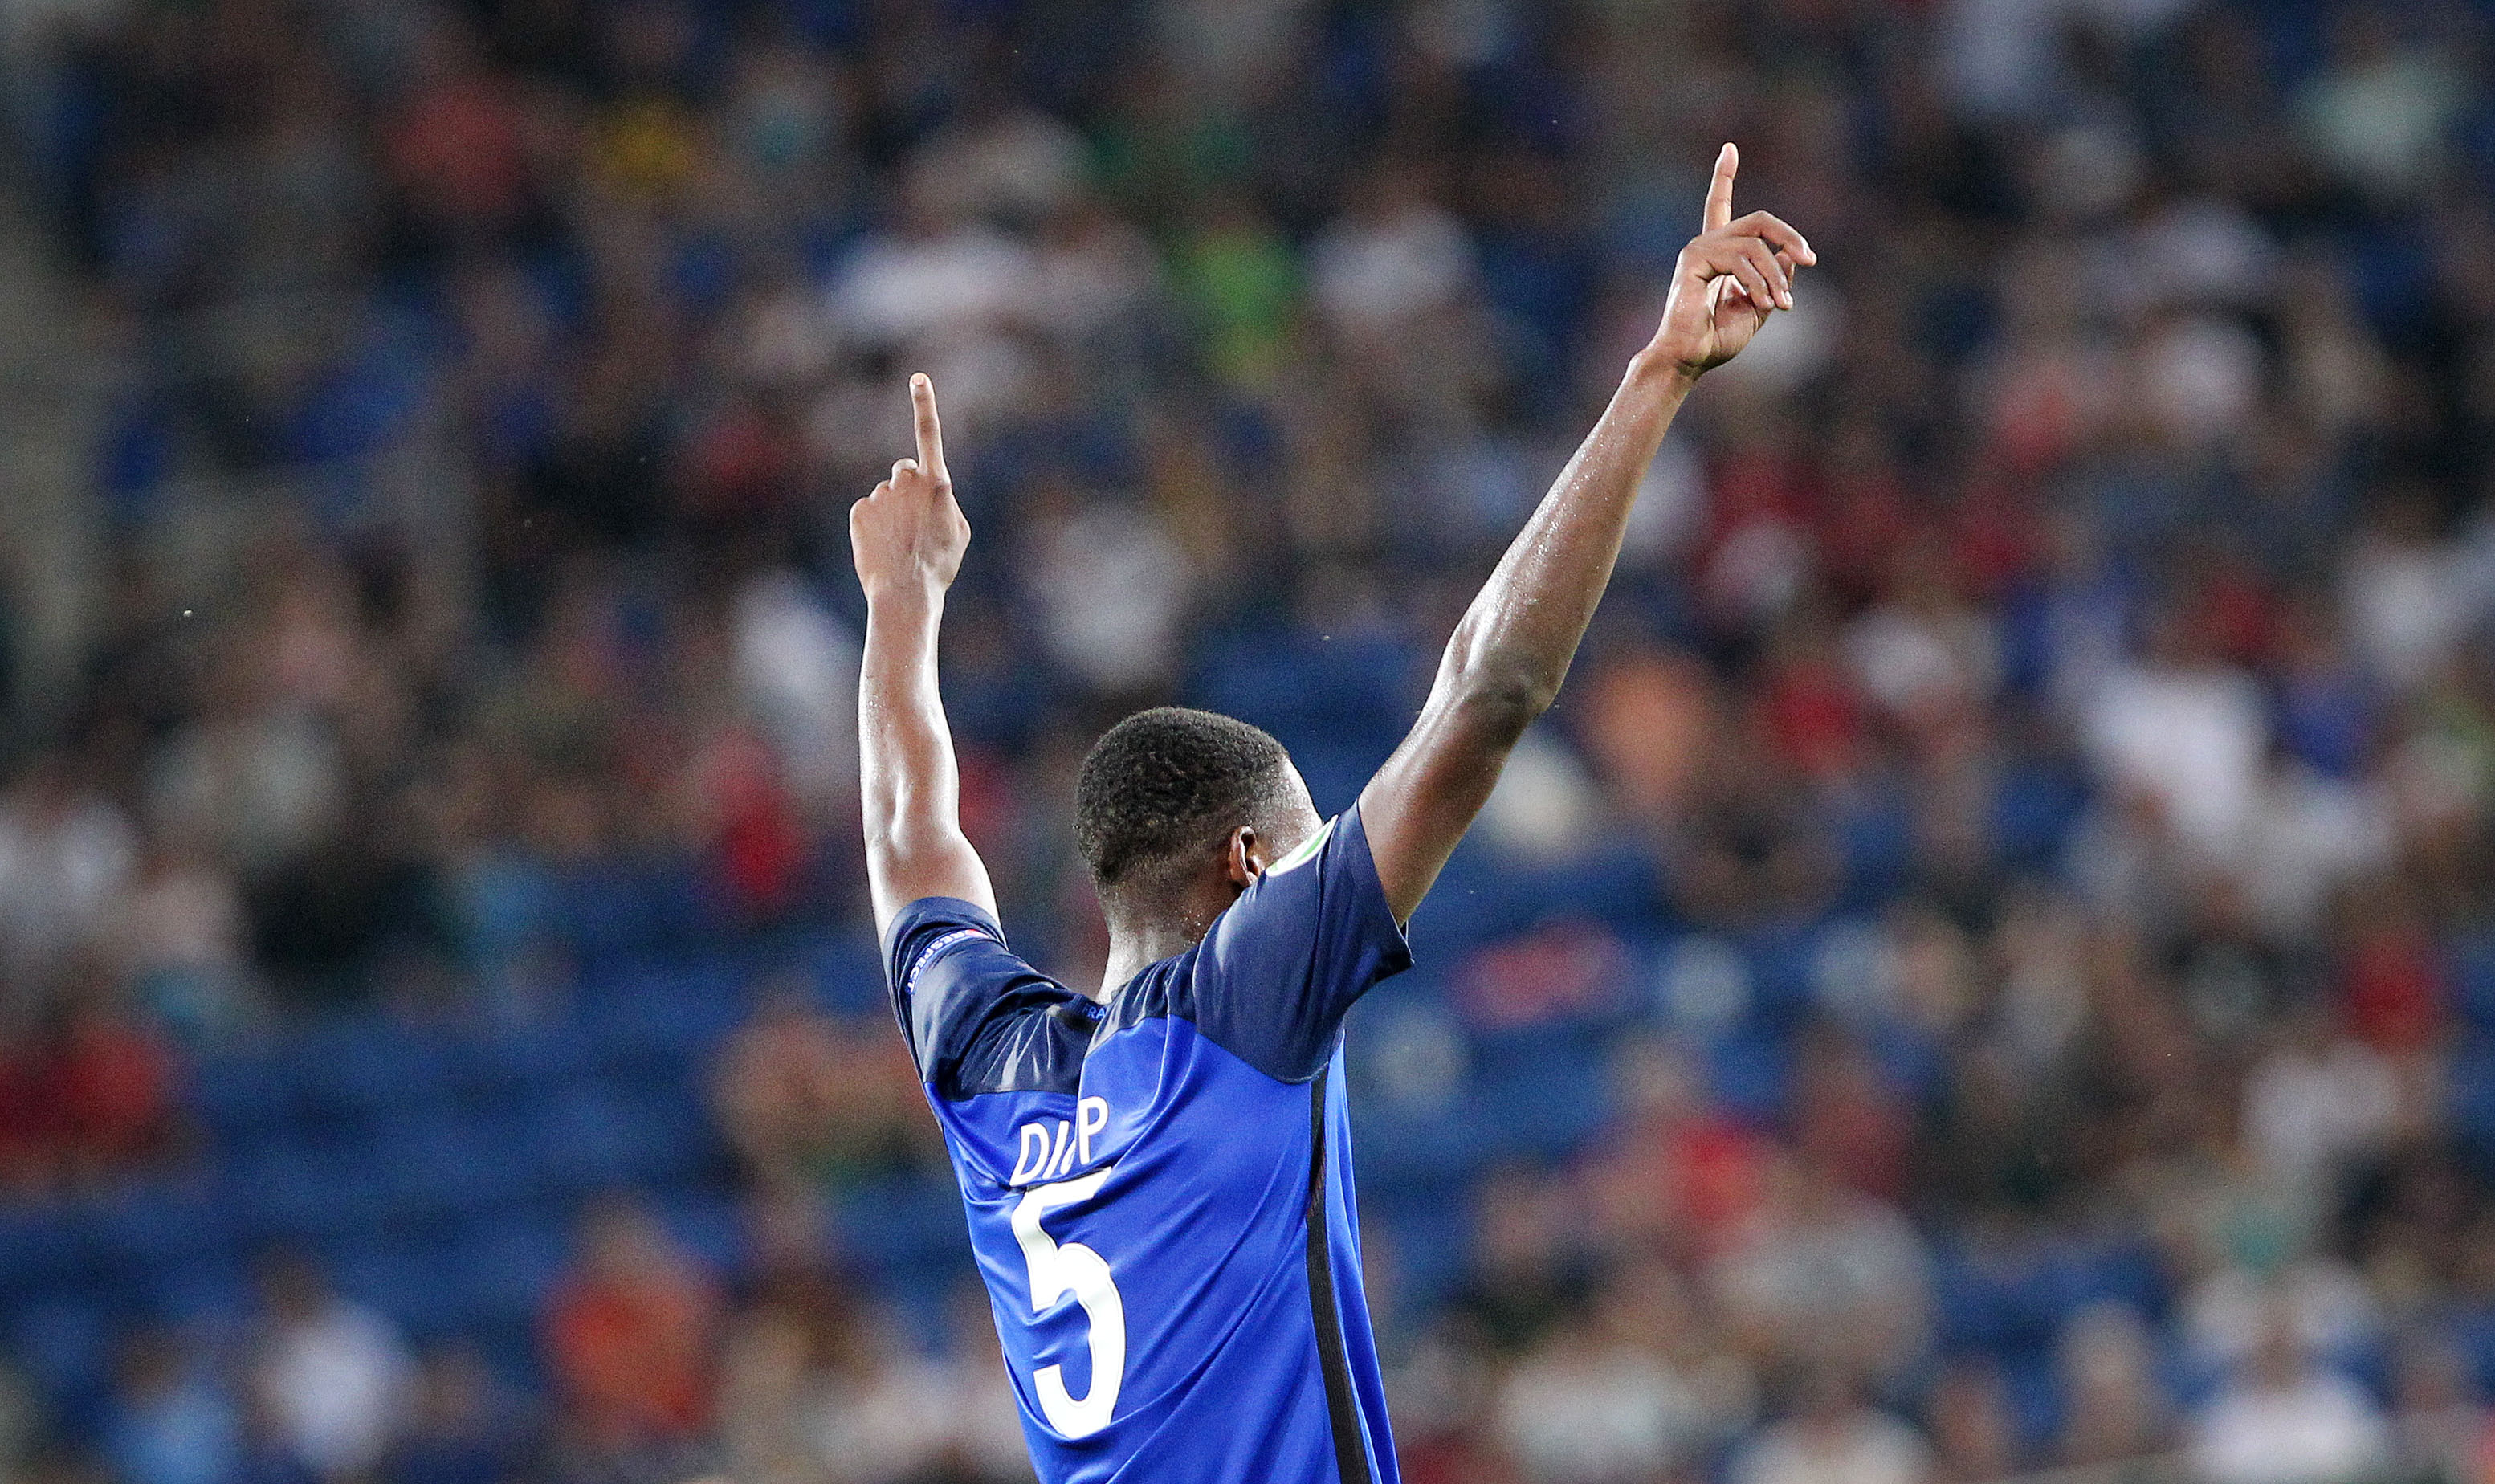 France's Issa Diop celebrates scoring the 4-0 during the Under 19 Football European Championships final match France vs Italy in Sinsheim, southern Germany, on July 24, 2016. / AFP / DANIEL ROLAND        (Photo credit should read DANIEL ROLAND/AFP/Getty Images)